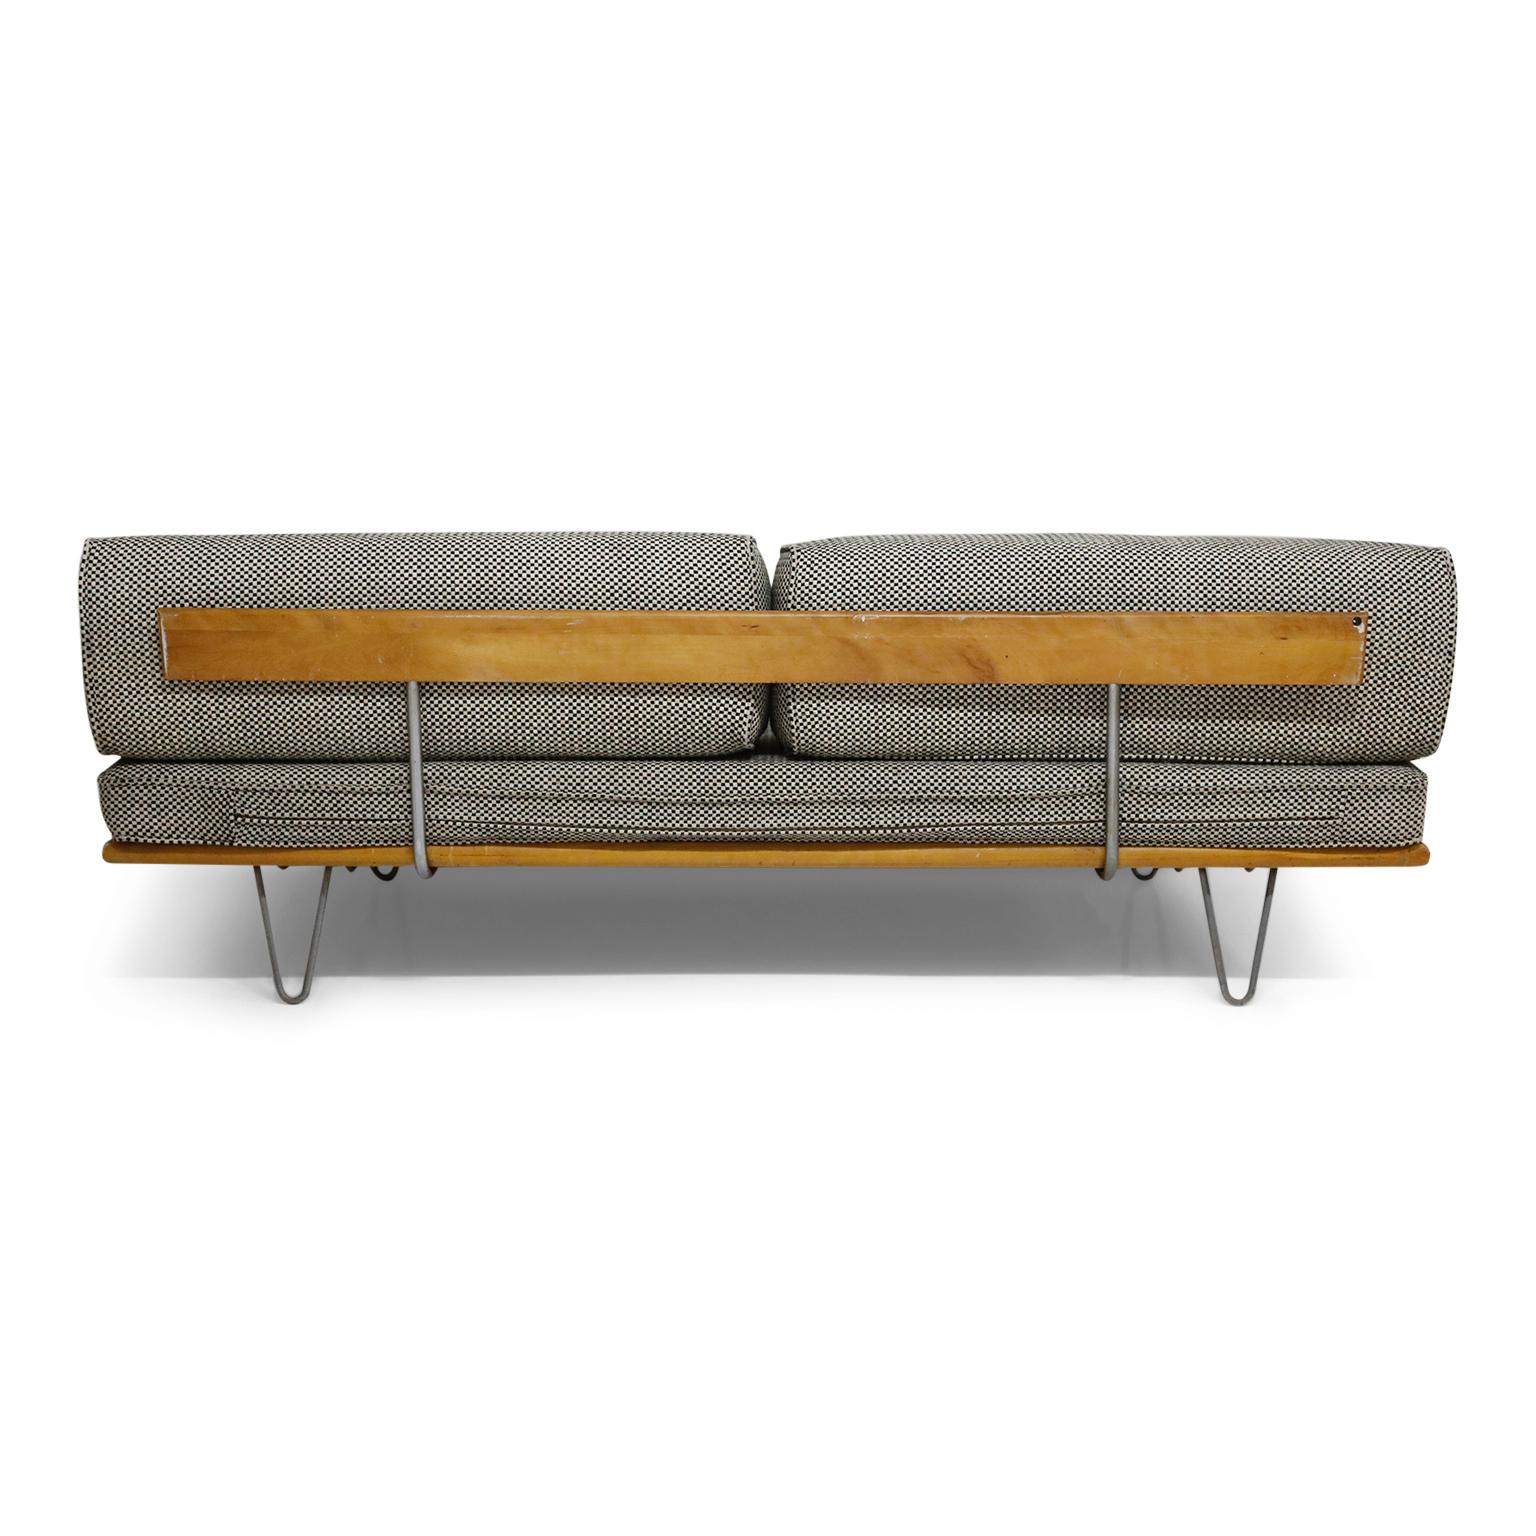 American Convertible Daybed Sofa with Hairpin Legs by George Nelson for Herman Miller